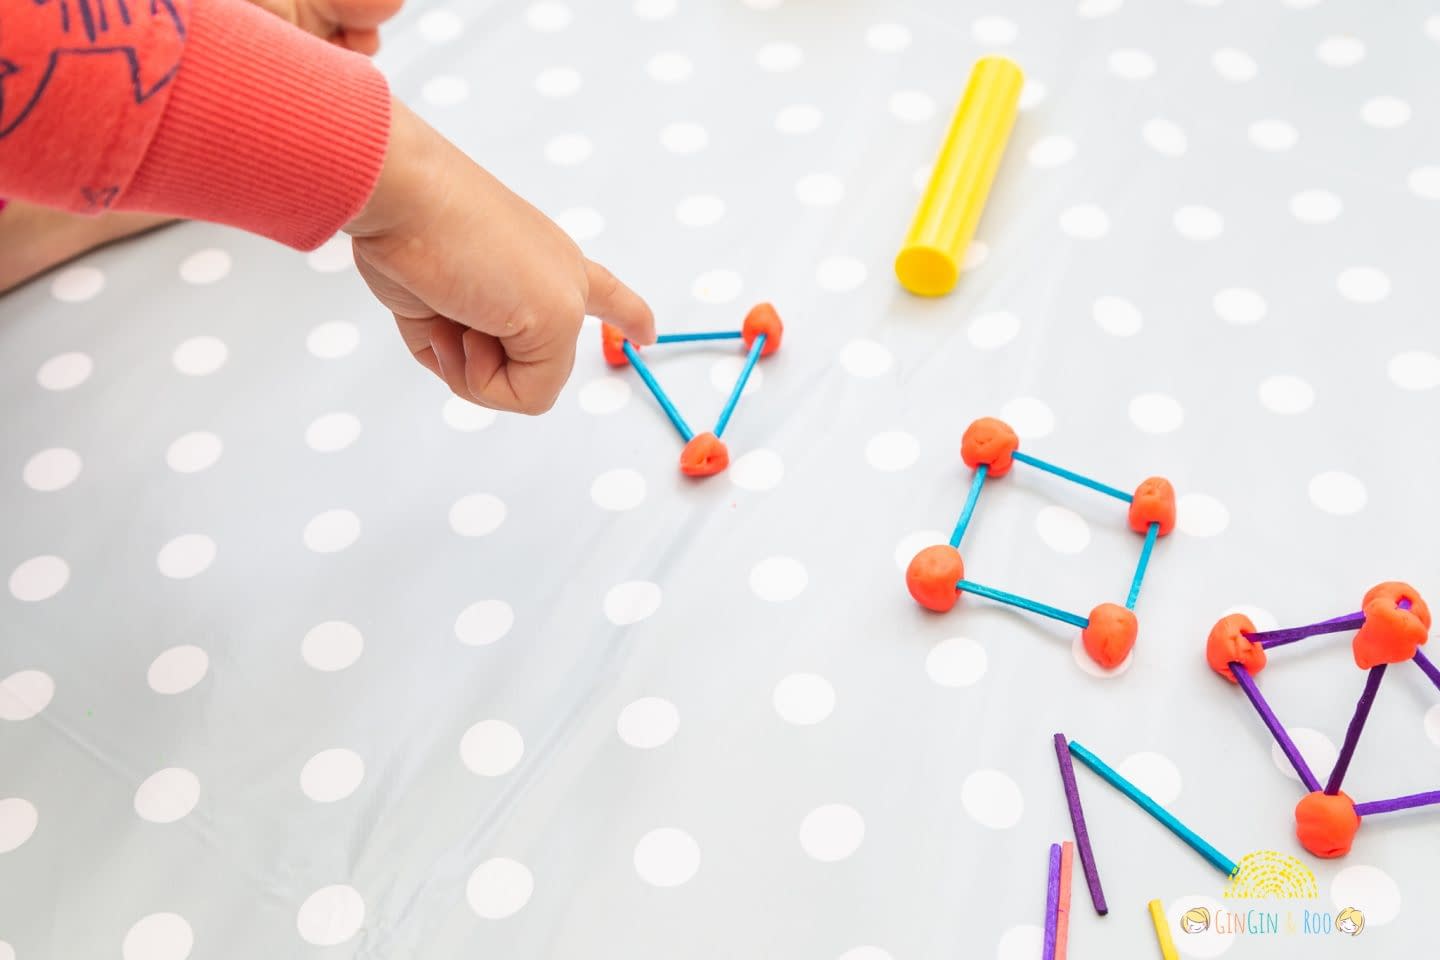 Making Matchstick Shapes. A fun maths activity from GinGin & Roo
#toddleractivity #toddlereducation #toddlerlearn